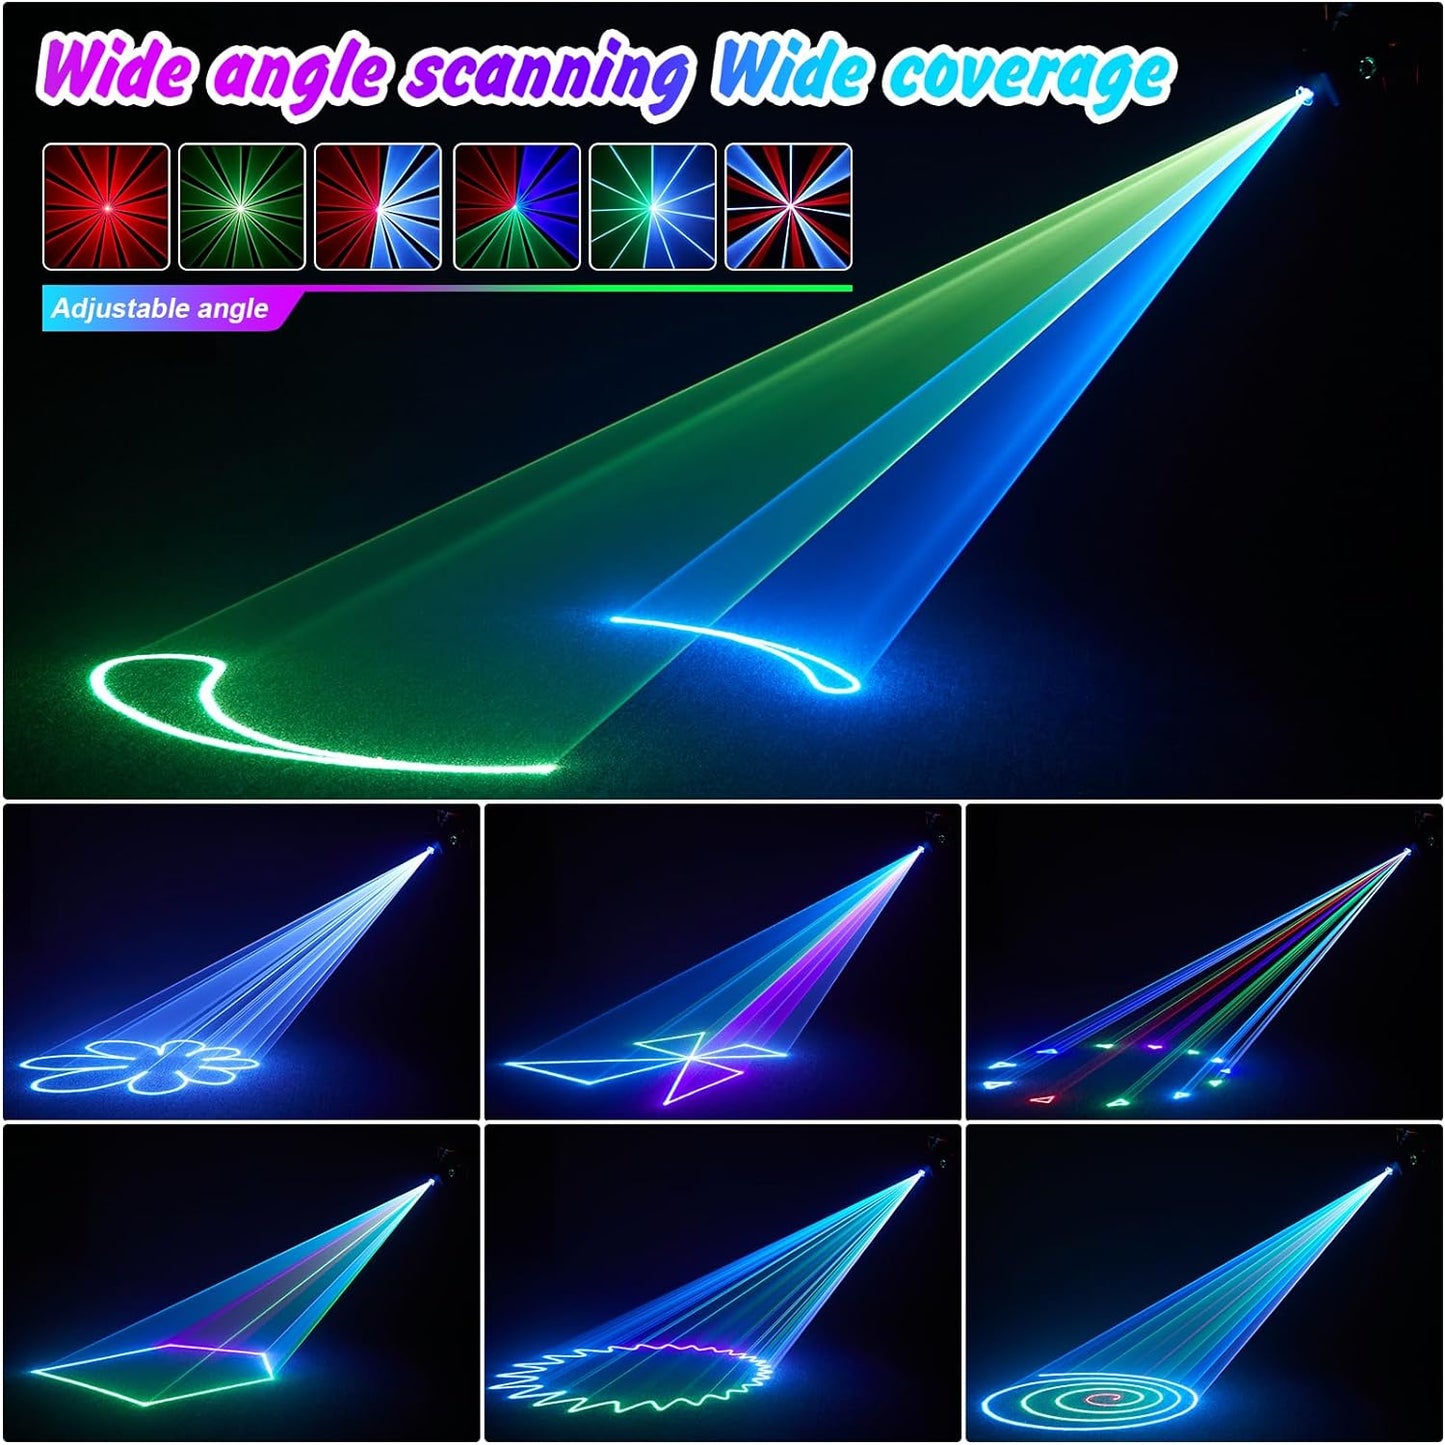 WZYBUTA DJ Laser Light Show 3d Animation, RGB Full Color Animation Lazer Projectors, DMX Laser Show with Remote Control Sound Activated Stage Laser Light Professional for Club Disco Home Bir